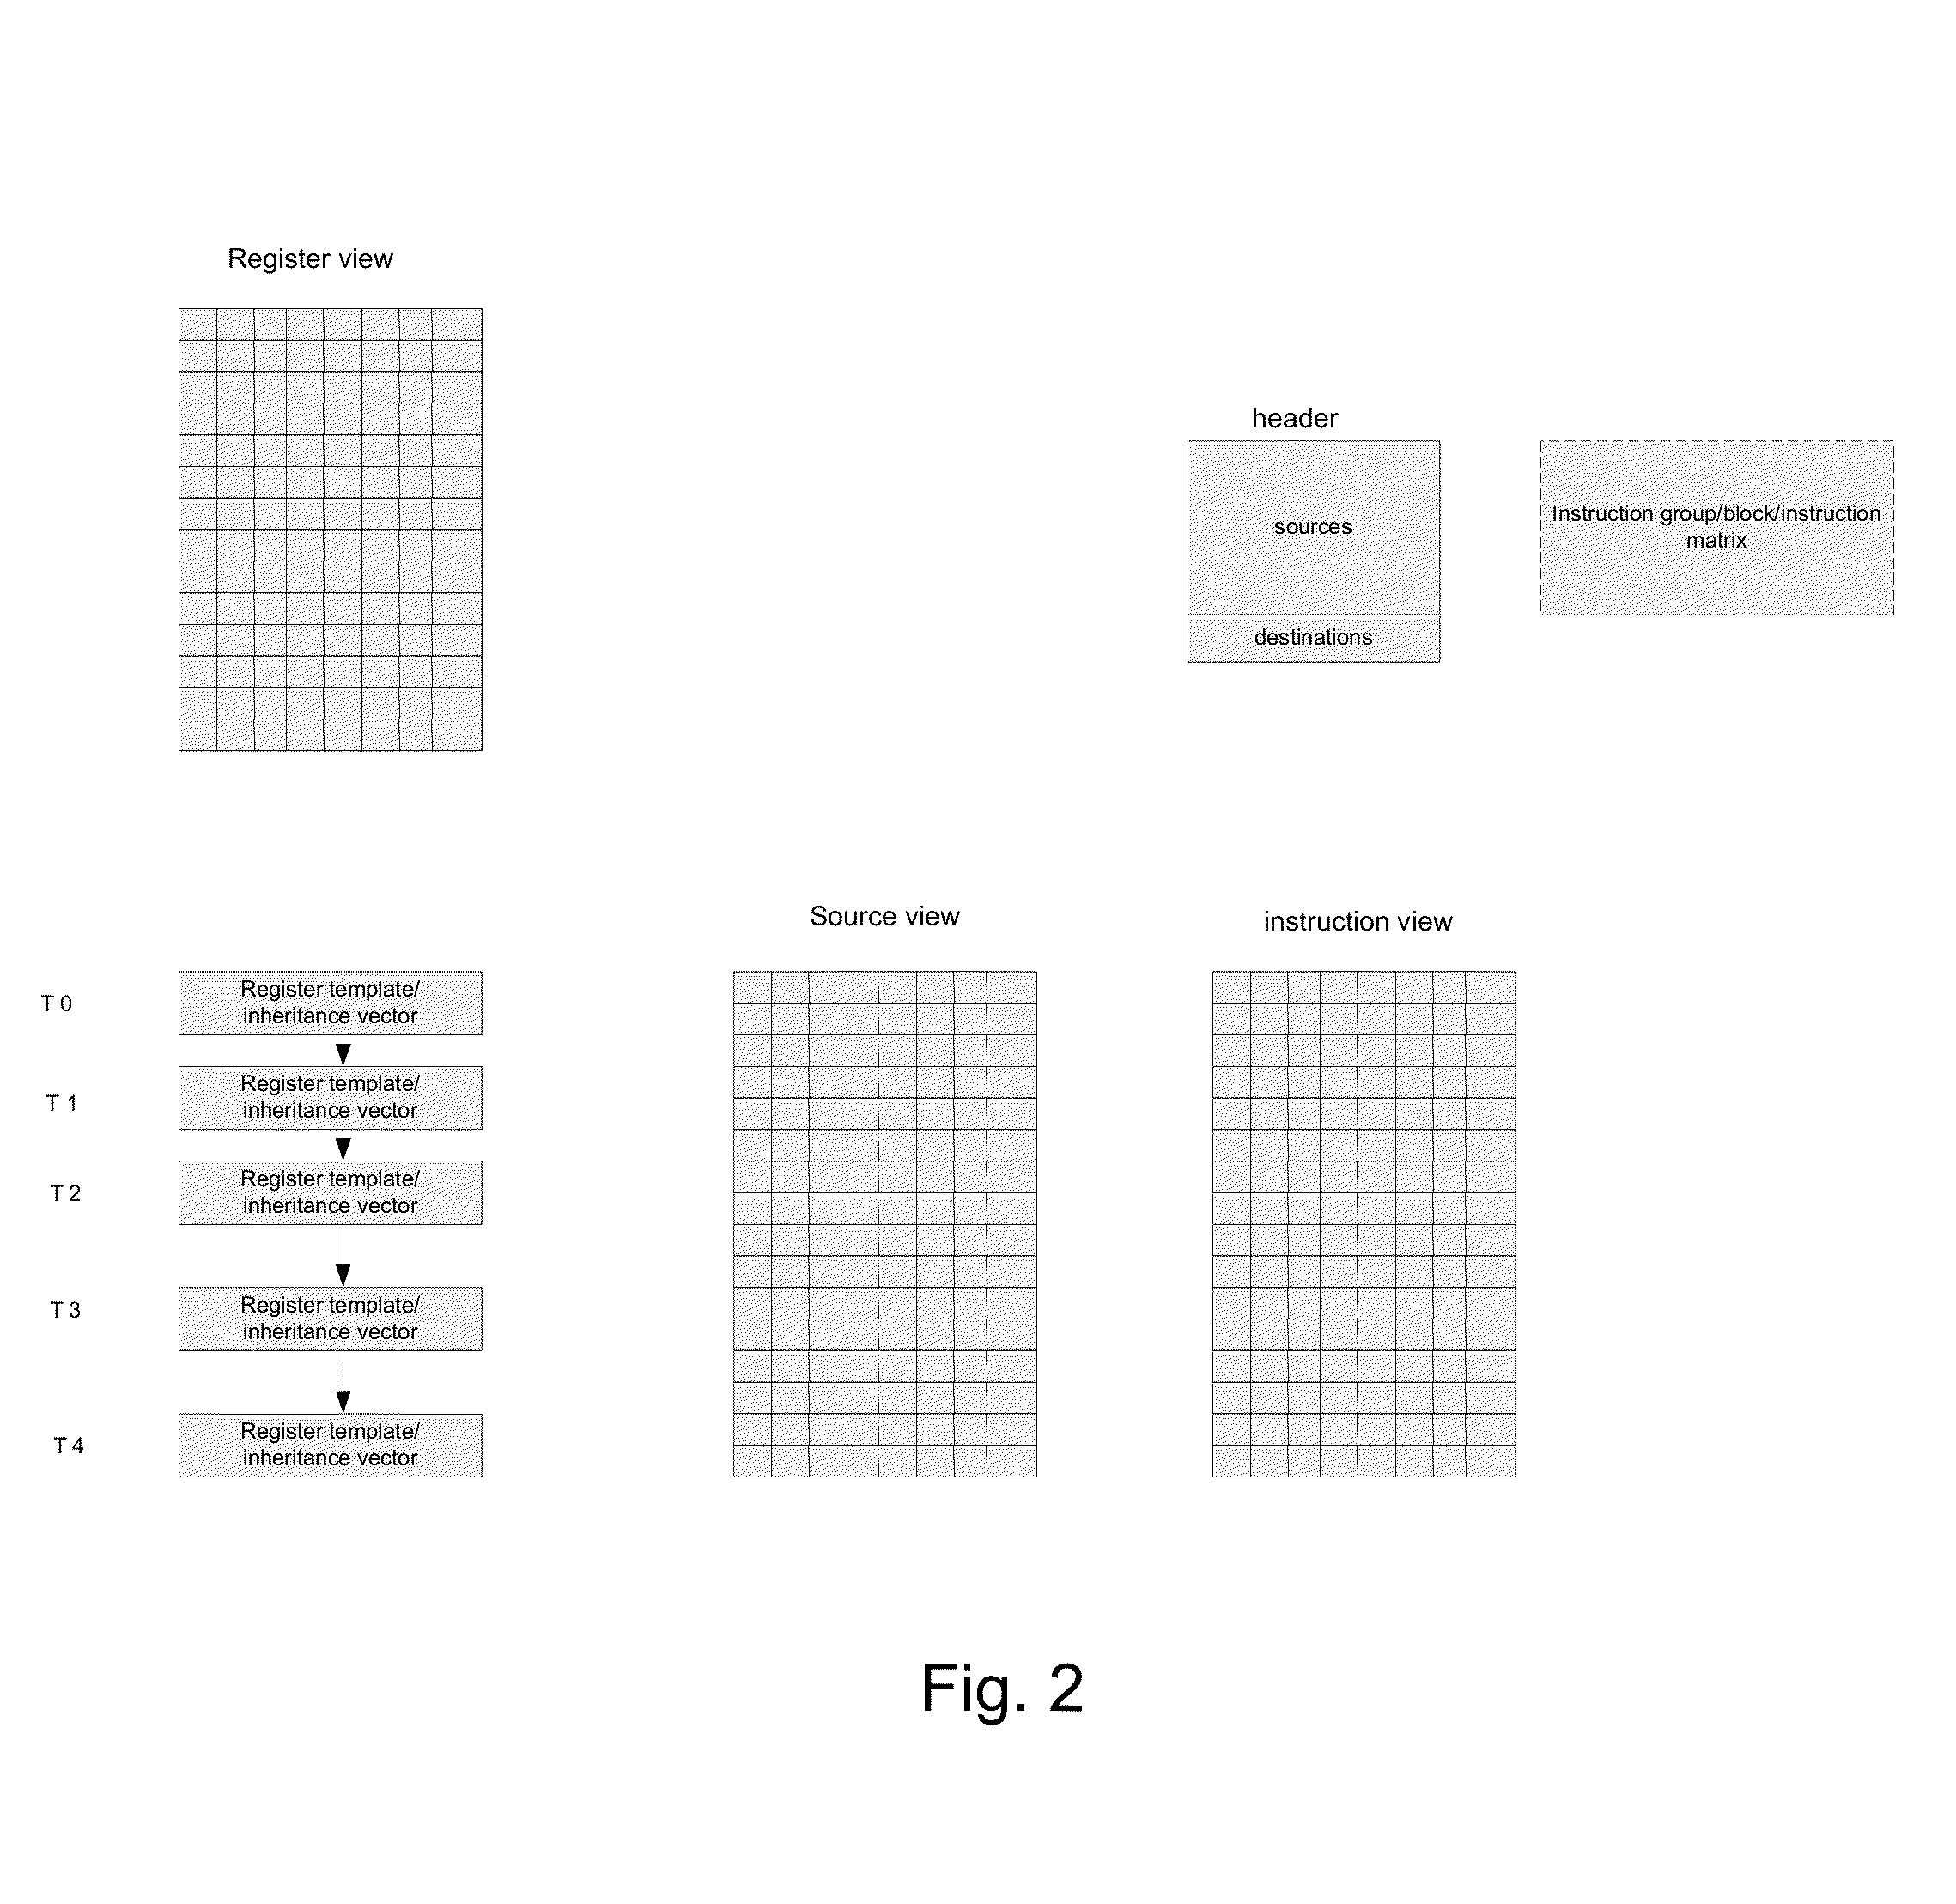 Method for dependency broadcasting through a source organized source view data structure